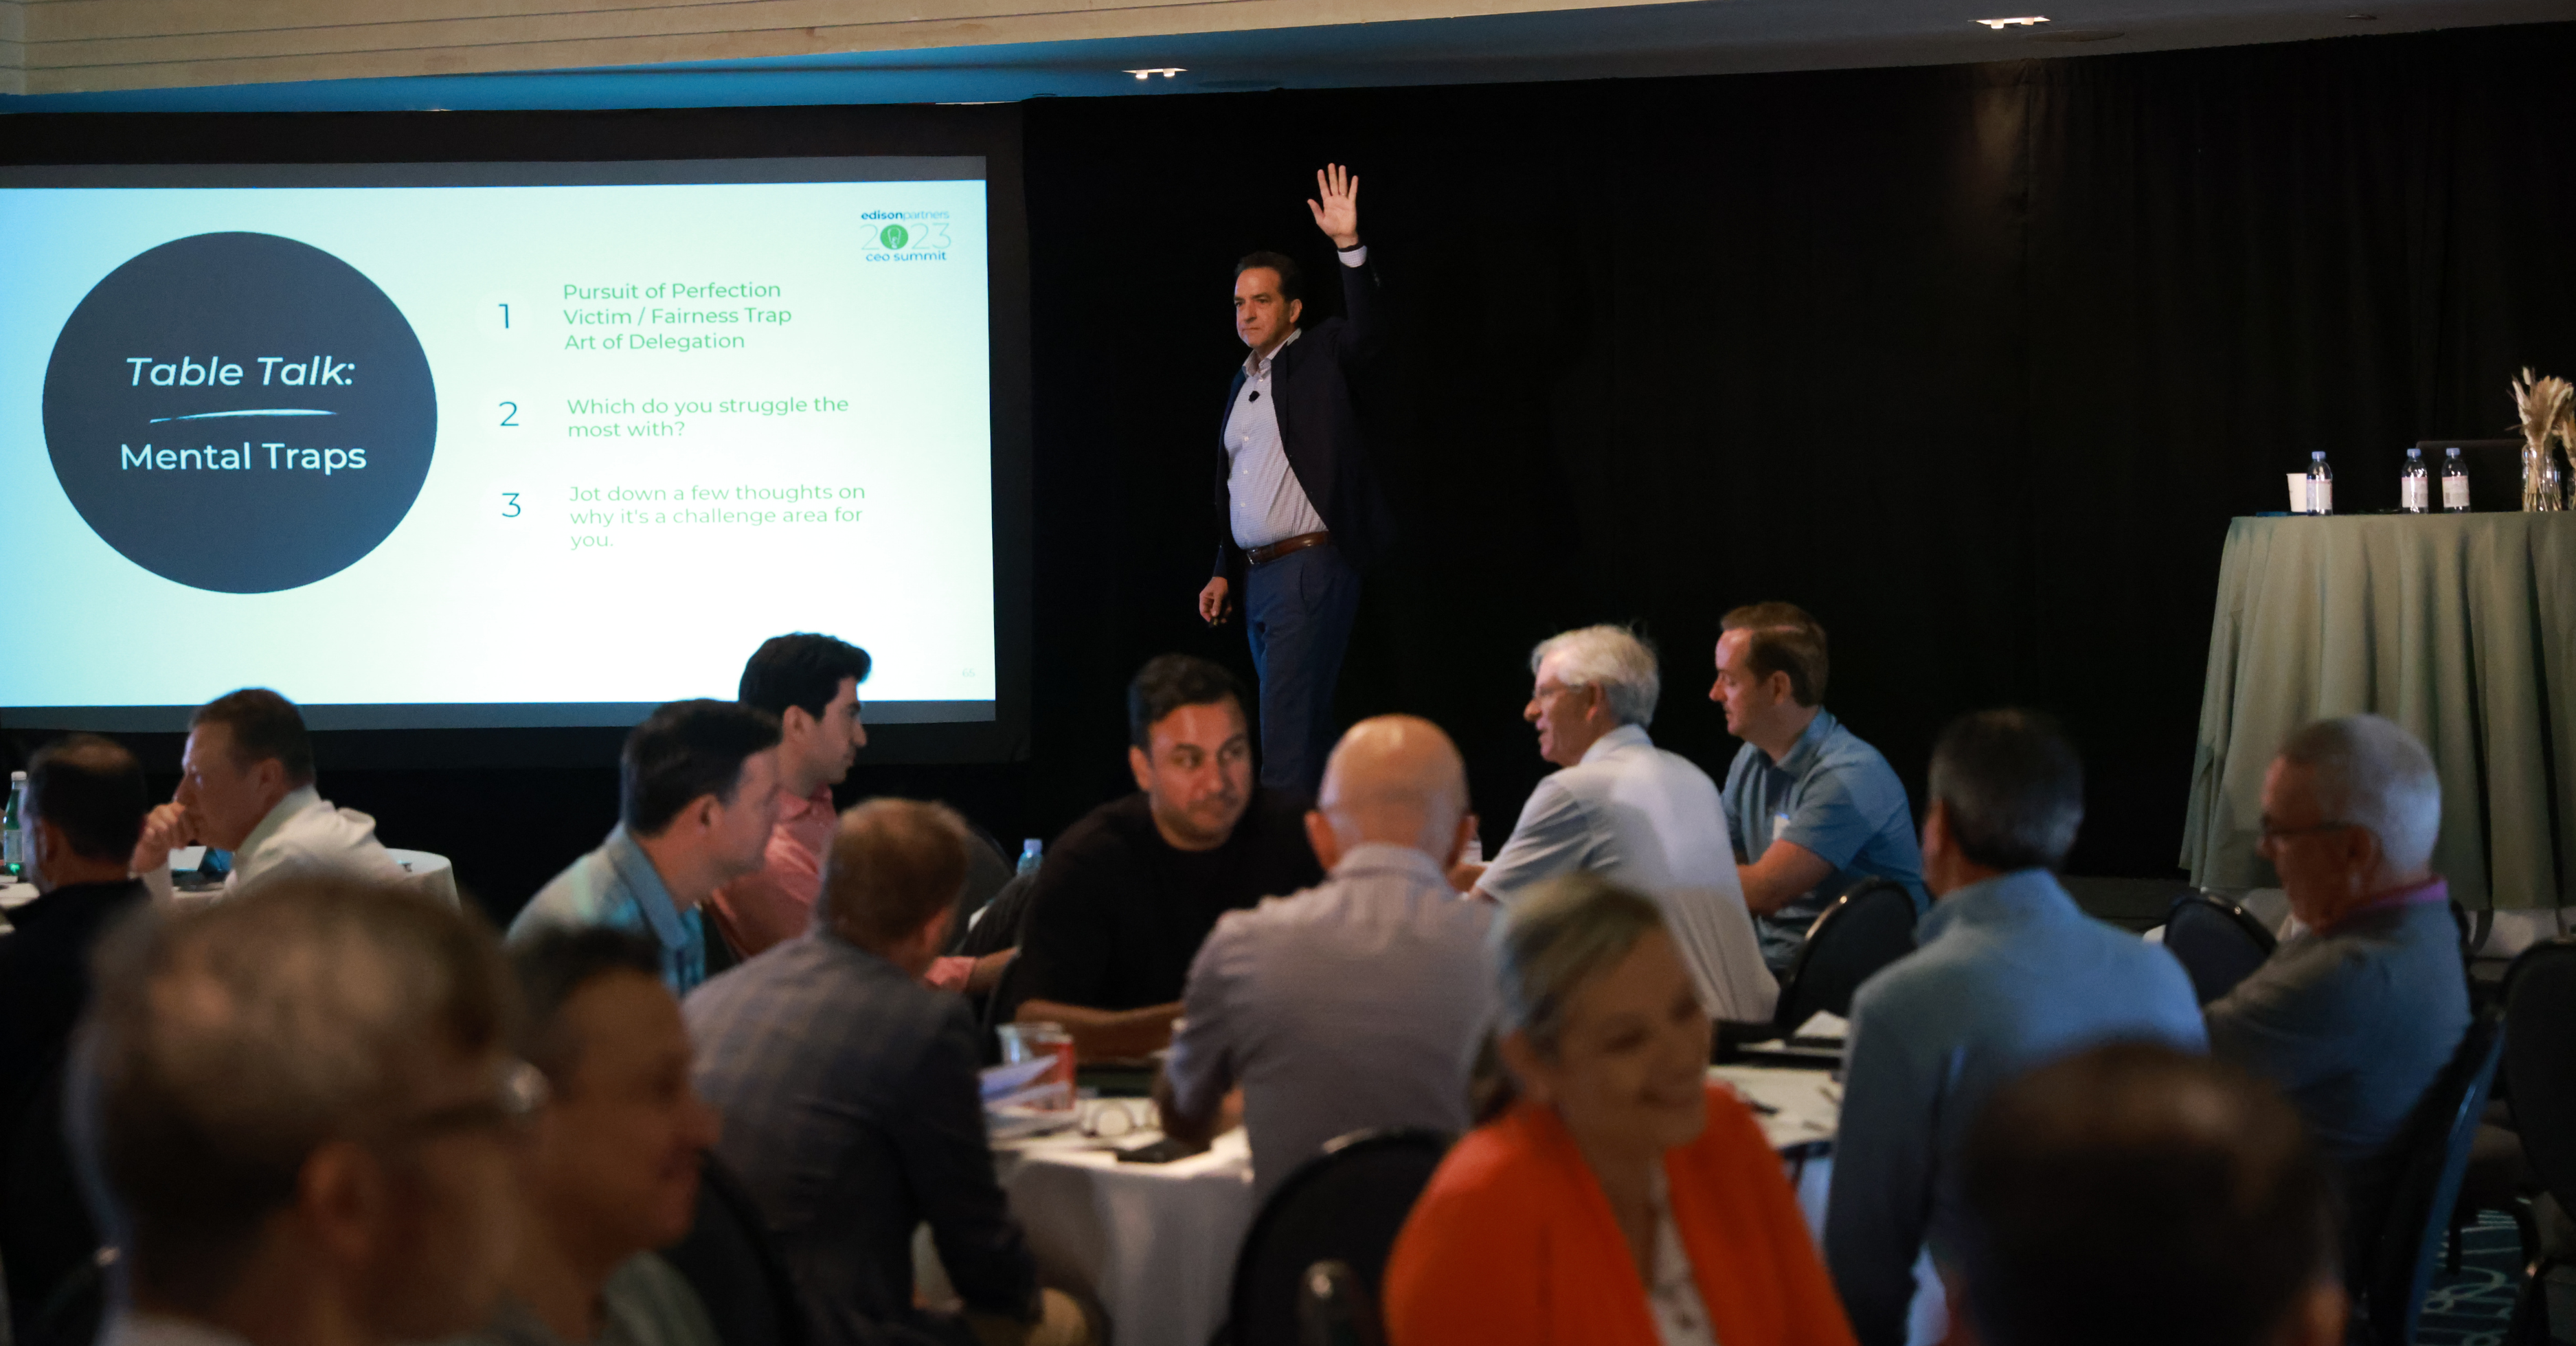 2023 CEO Summit Reflection: 3 Key Takeaways from Adam Bryant’s Keynote Sessions